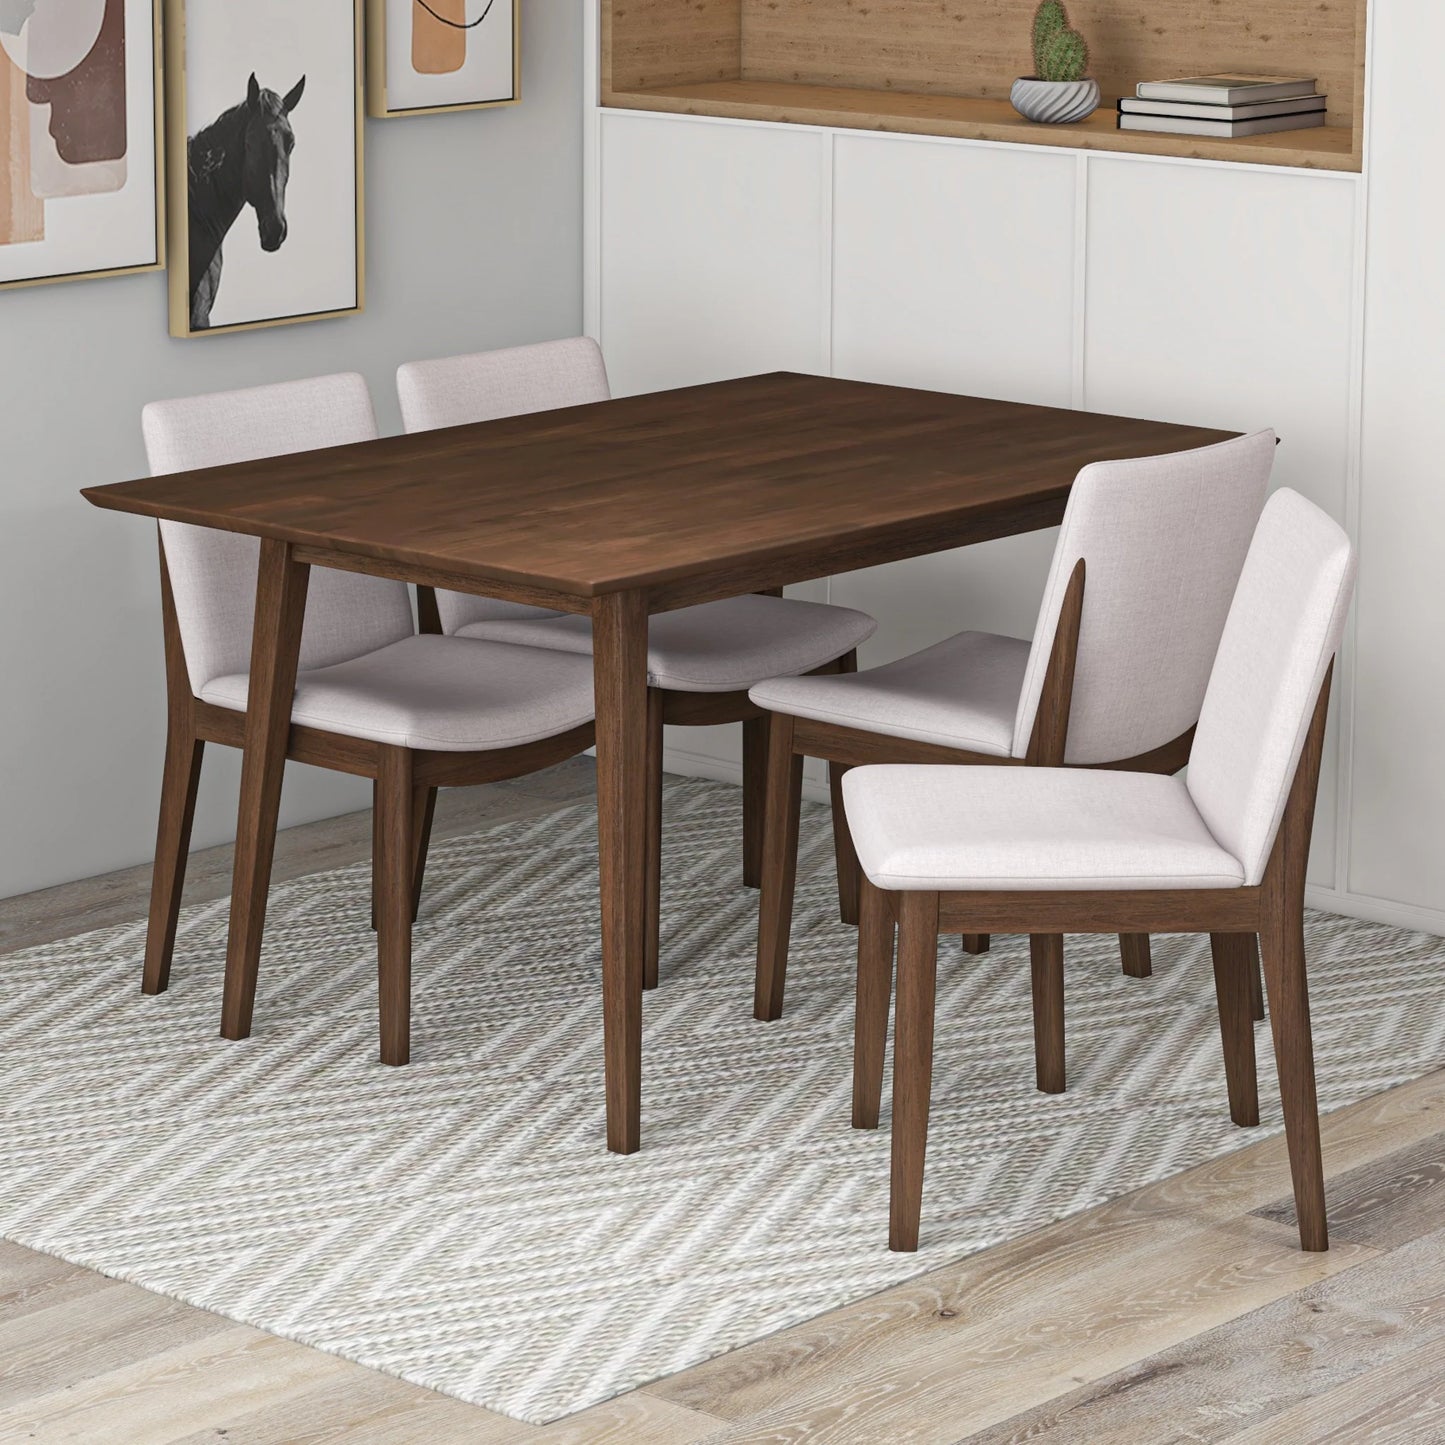 Adira (Small - Walnut) Dining Set with 4 Virginia (Beige) Dining Chairs